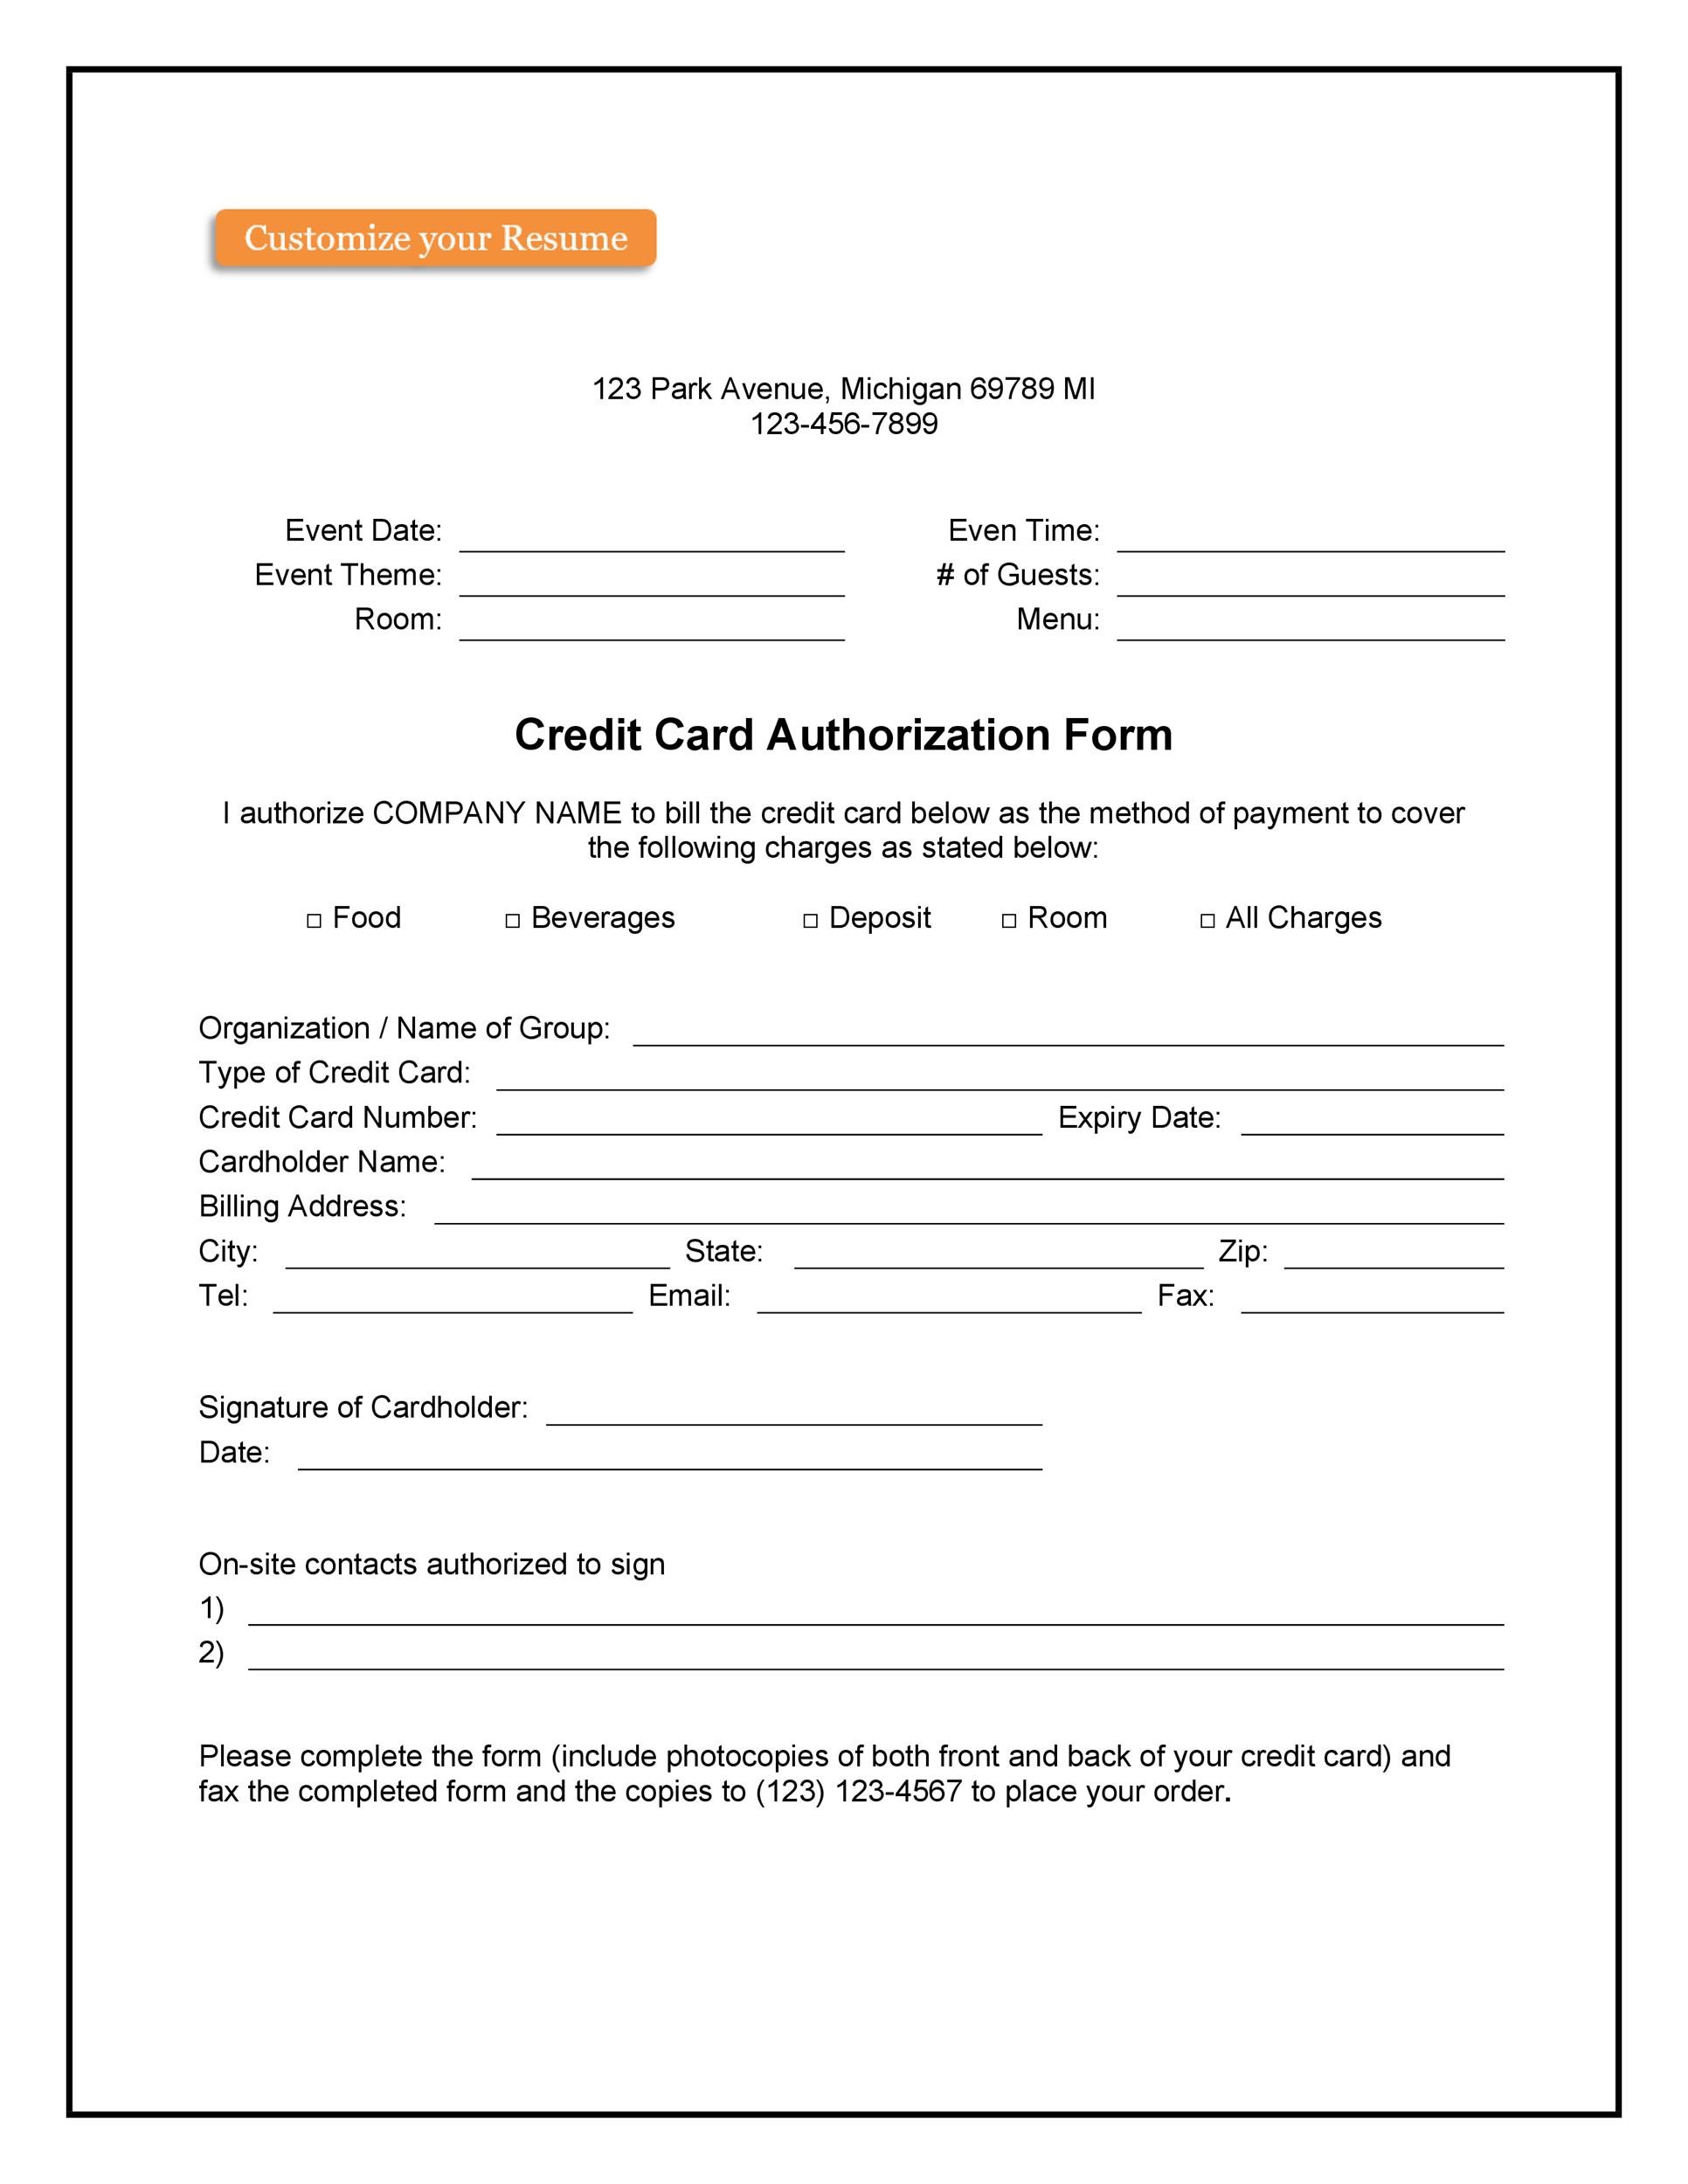 41 Credit Card Authorization Forms Templates Ready To Use 1000